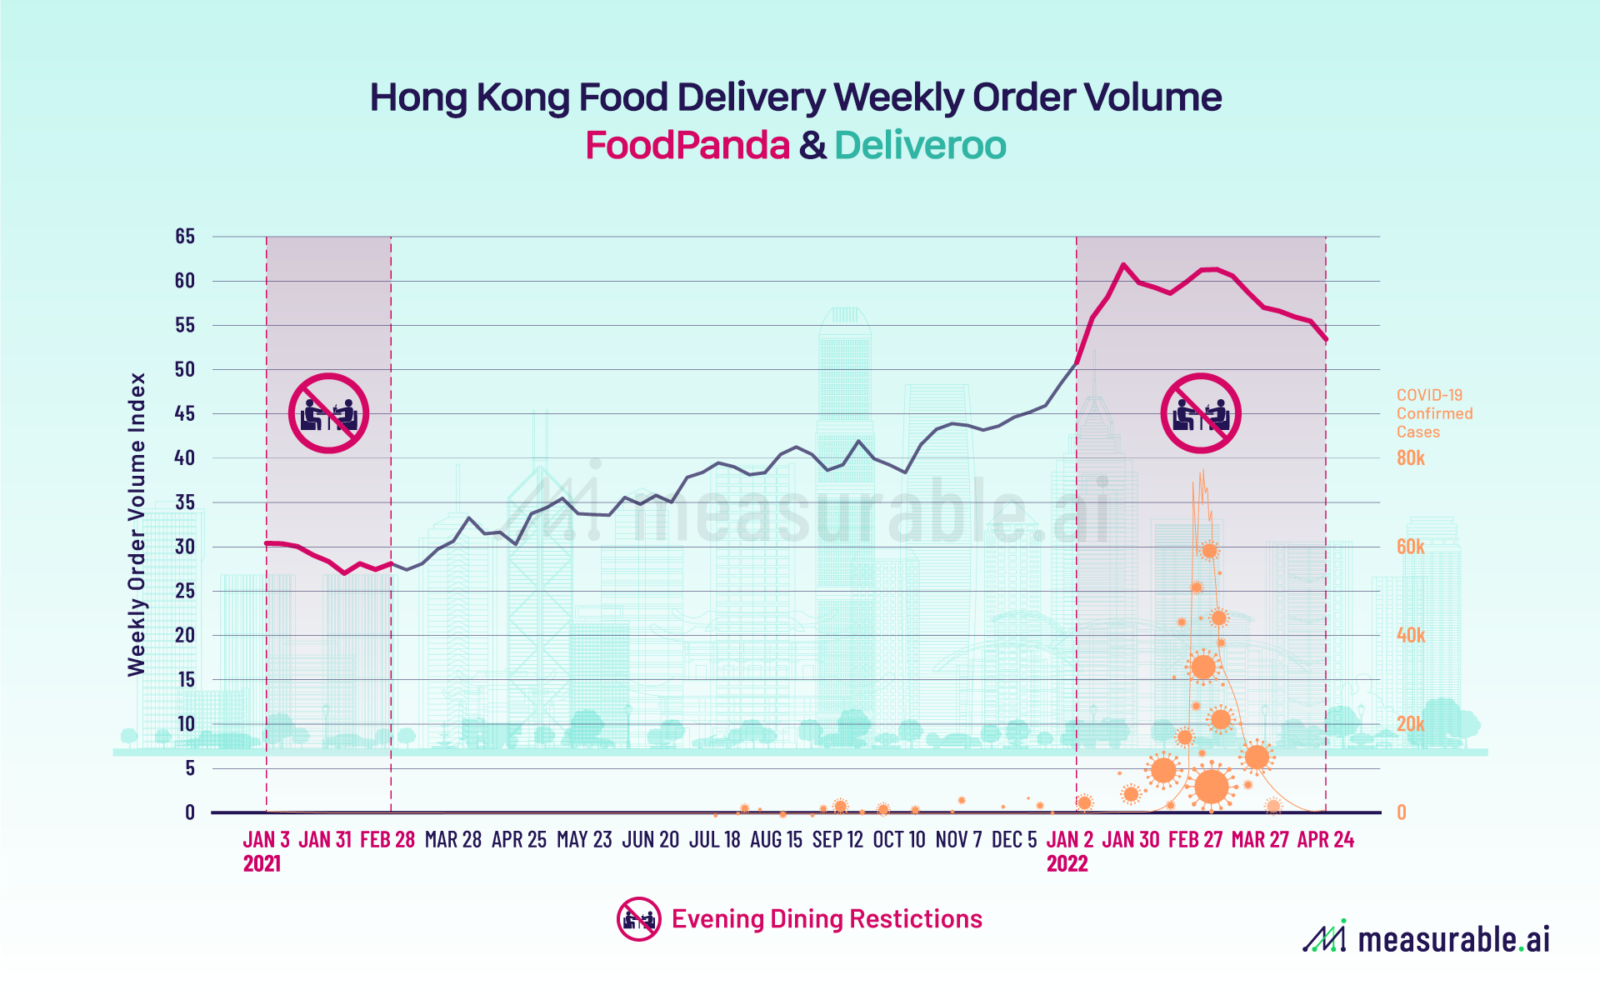 Hong Kong Food Delivery Order Volume during COVID-19